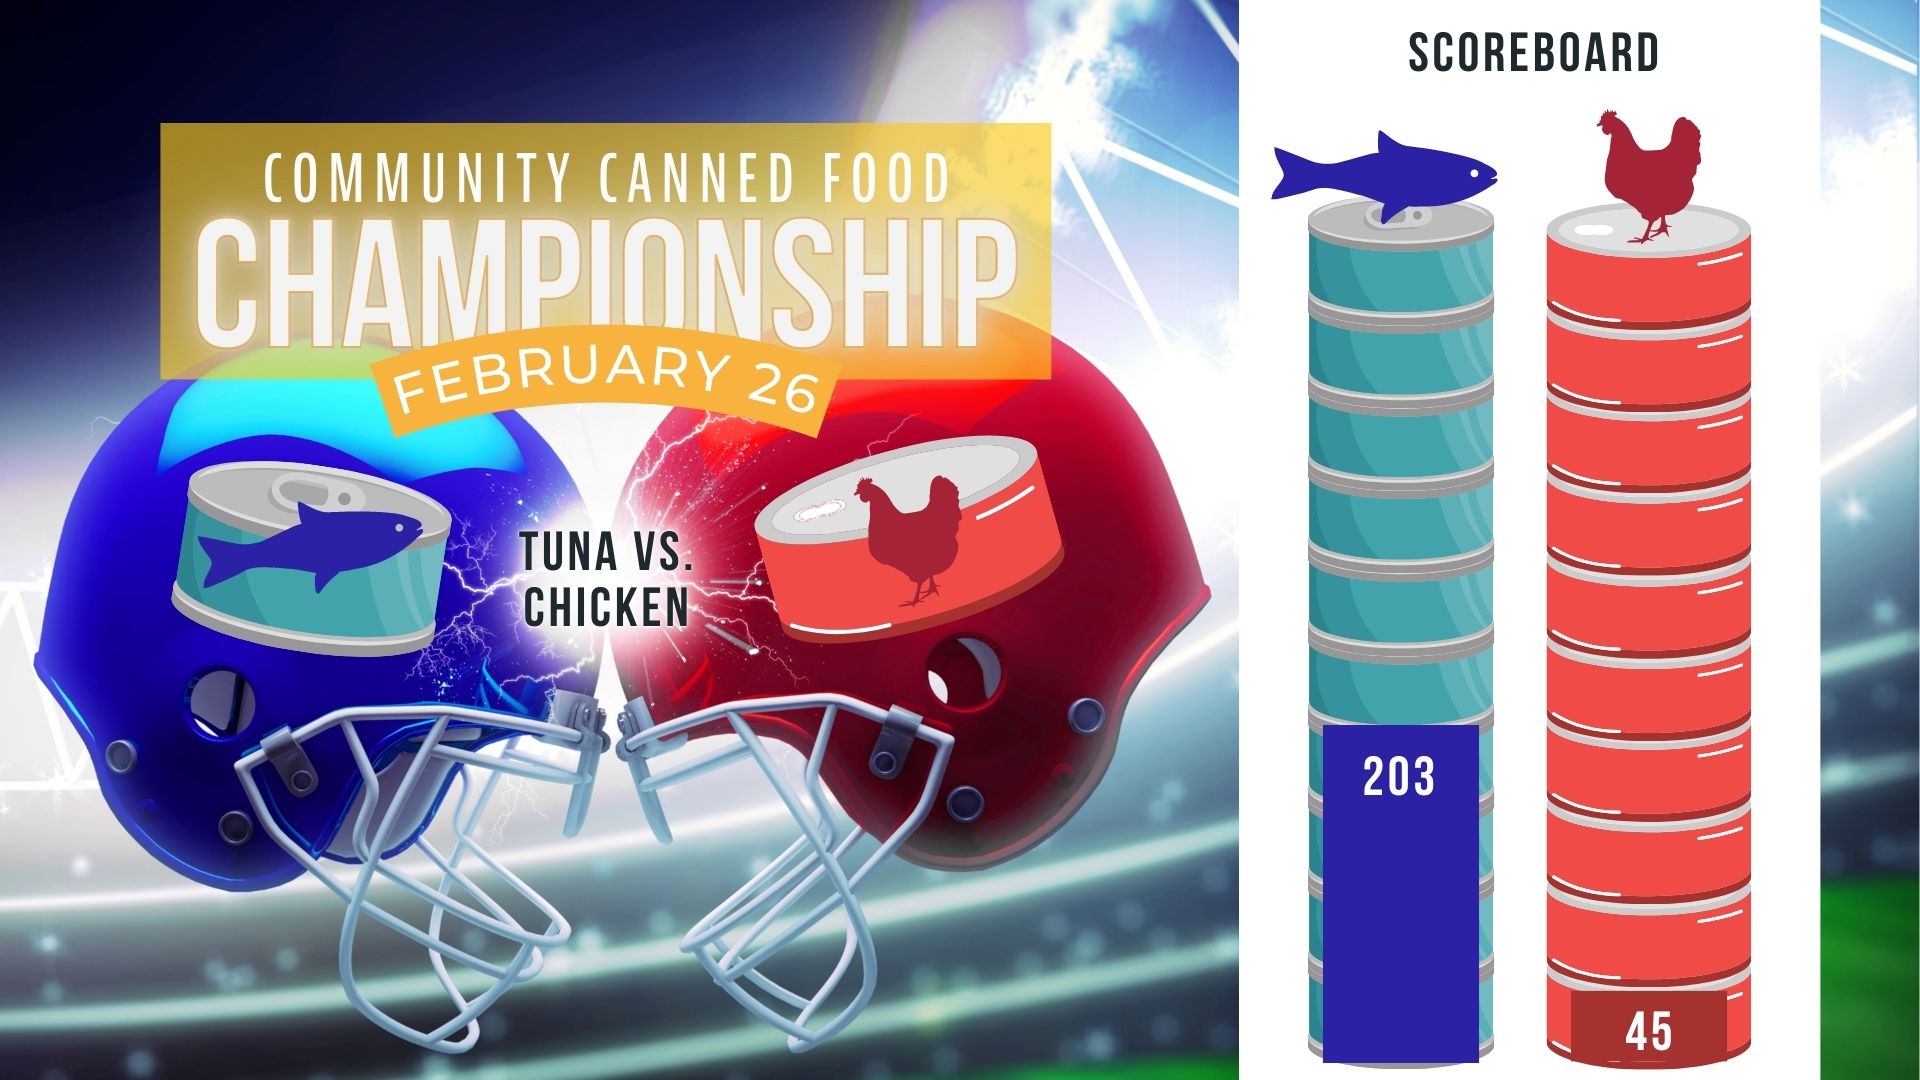 Team Tuna is off to an impressive lead in the first quarter